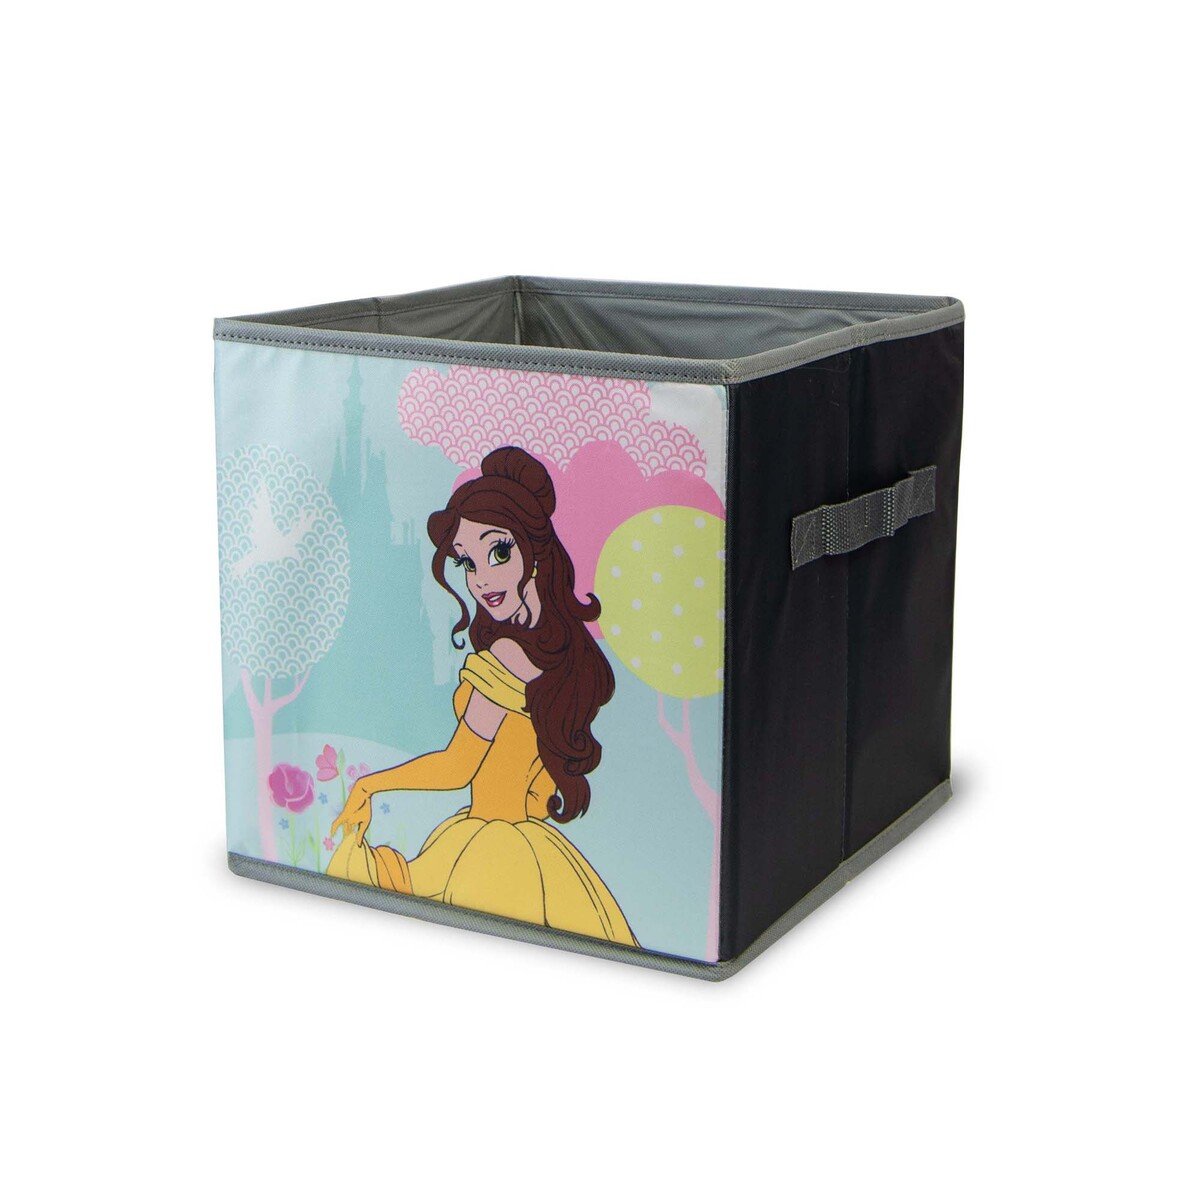 Princess Collapsible Storage Box Without Lids, 26.6 cm(LBH), Multicolored, TRHA19290